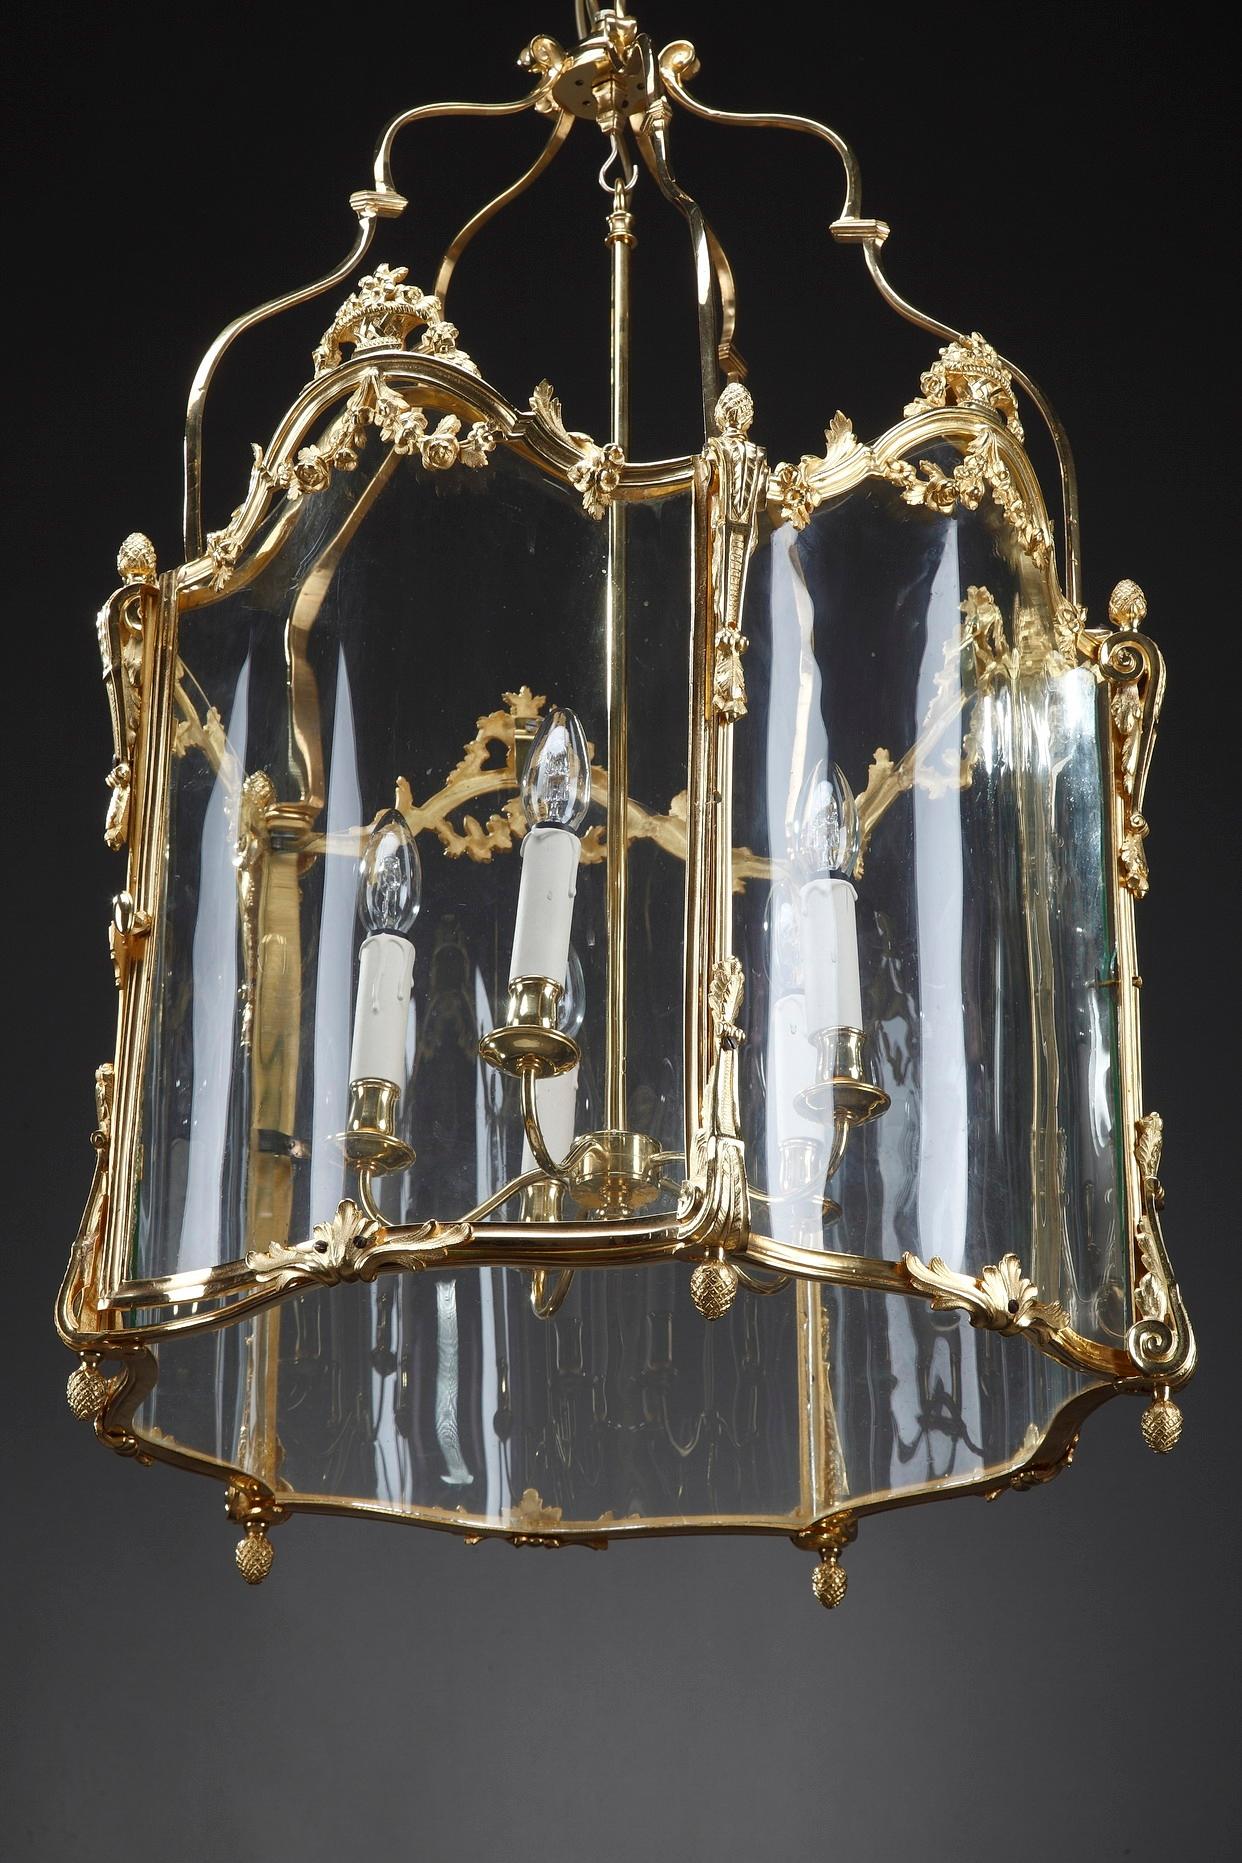 Monumental 5-light ormolu entrance hall lantern beautifully designed in Louis XV style. The polylobed mounts are finely decorated with flowery baskets, acanthus leaves, foliated console and pine cone finial. With its original curved glasses. This